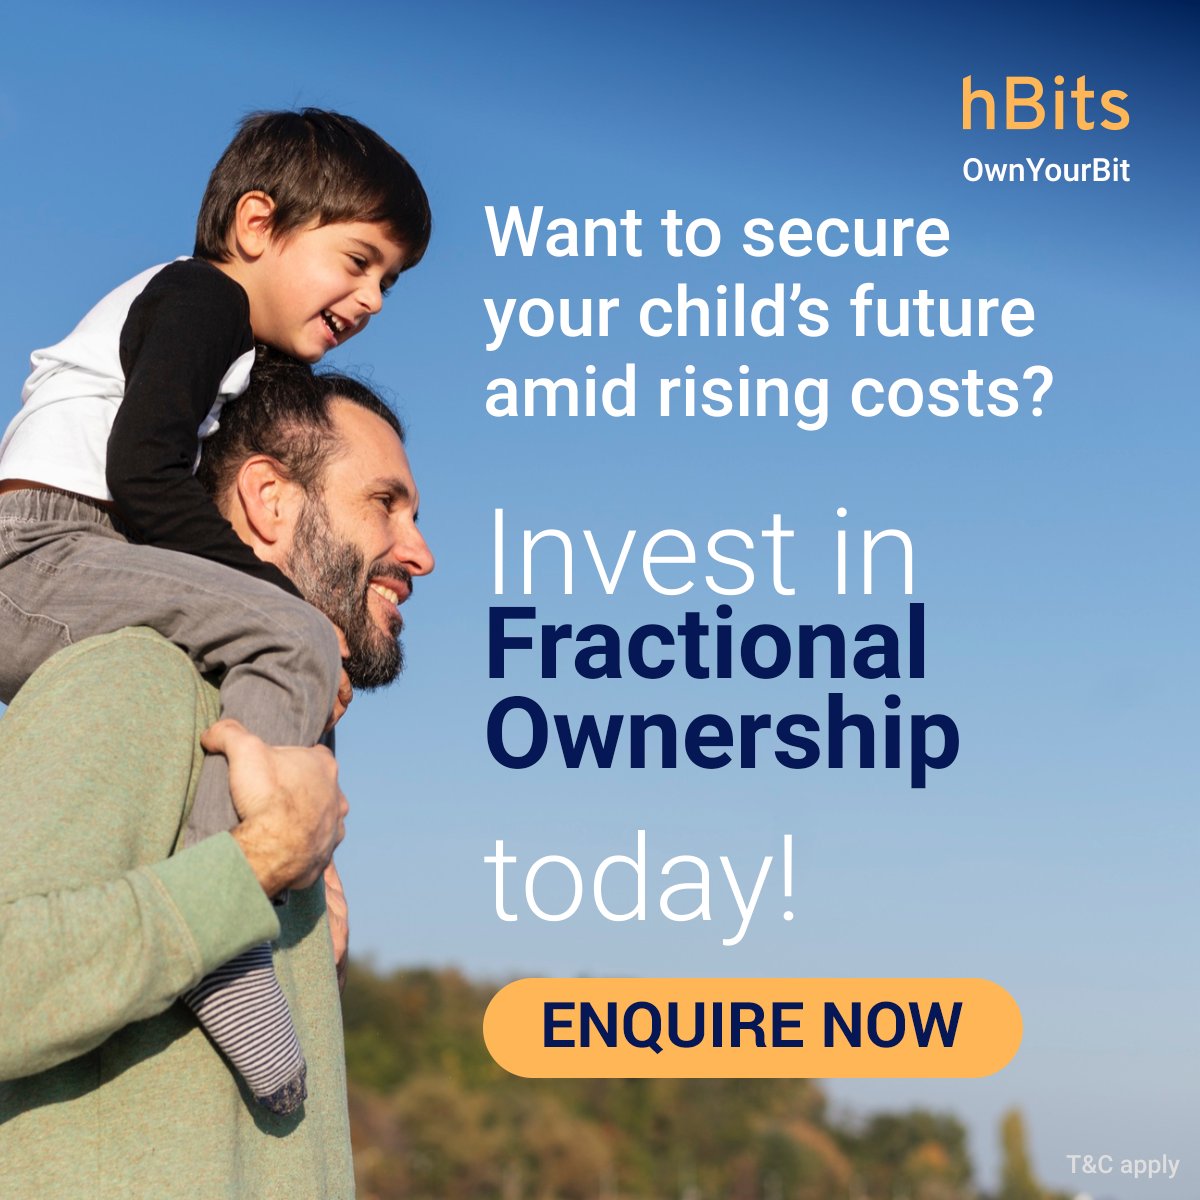 With the dual benefit of rental income and capital appreciation, fractional ownership is an ideal investment option for funding your child’s education. To know more, call us at +91 865 594 4200. #hBits #ownyourbit #Investment #FractionalOwnership #CommercialRealEstate